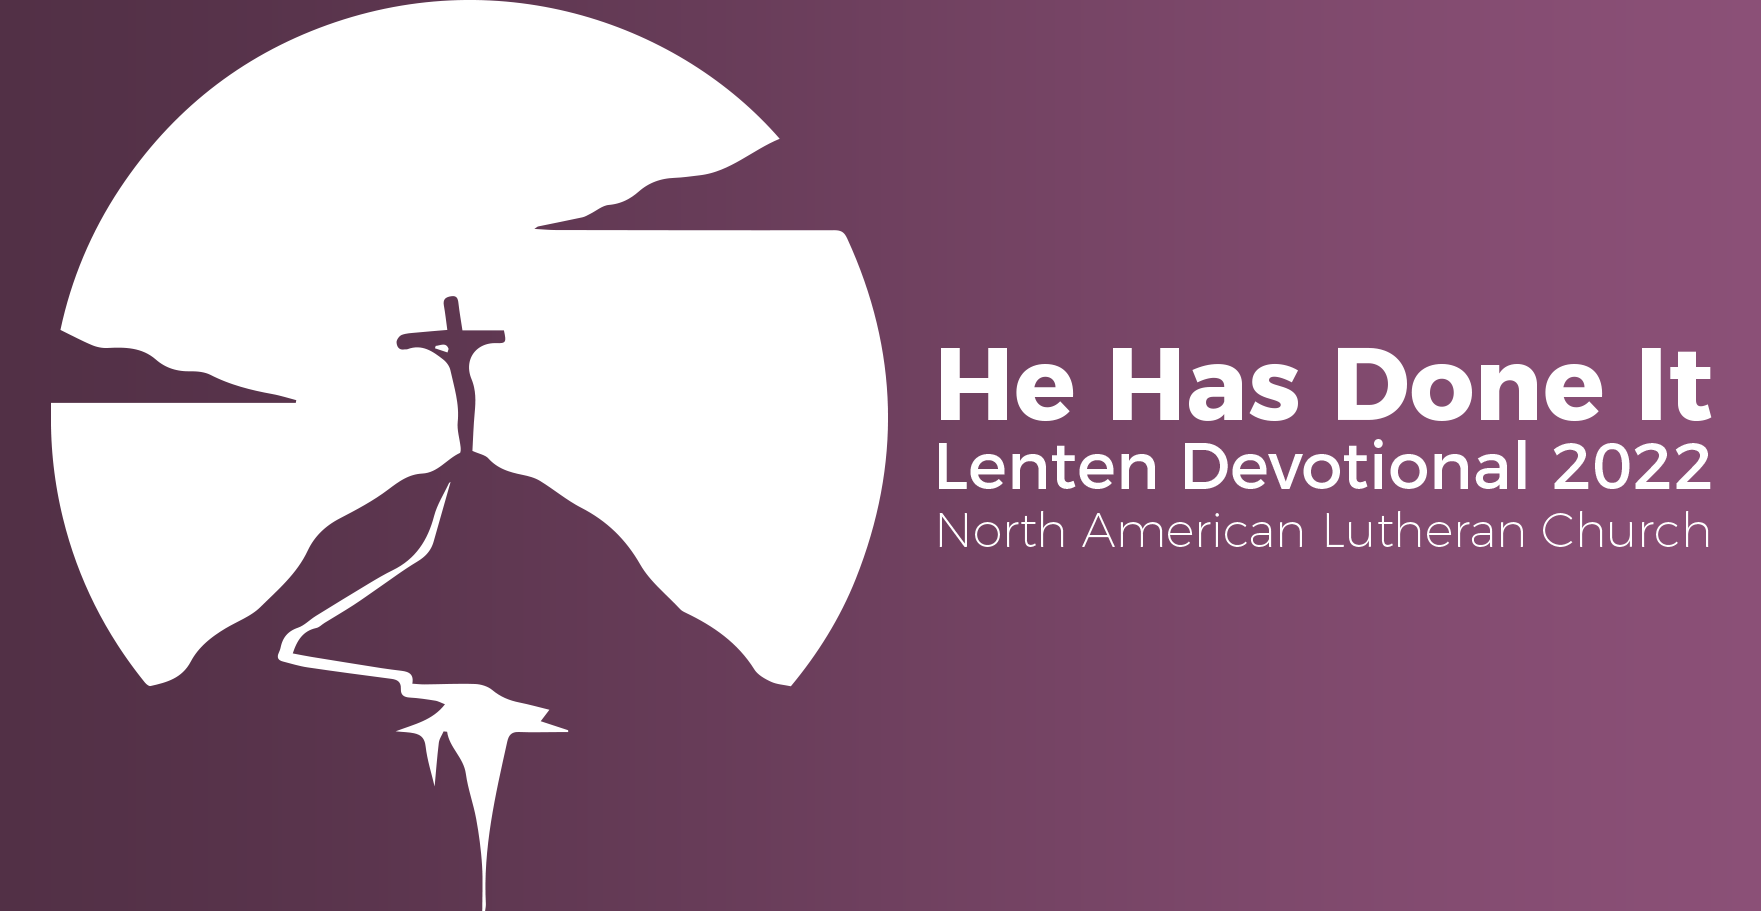 March 22, 2022 | Tuesday of the Week of Lent III